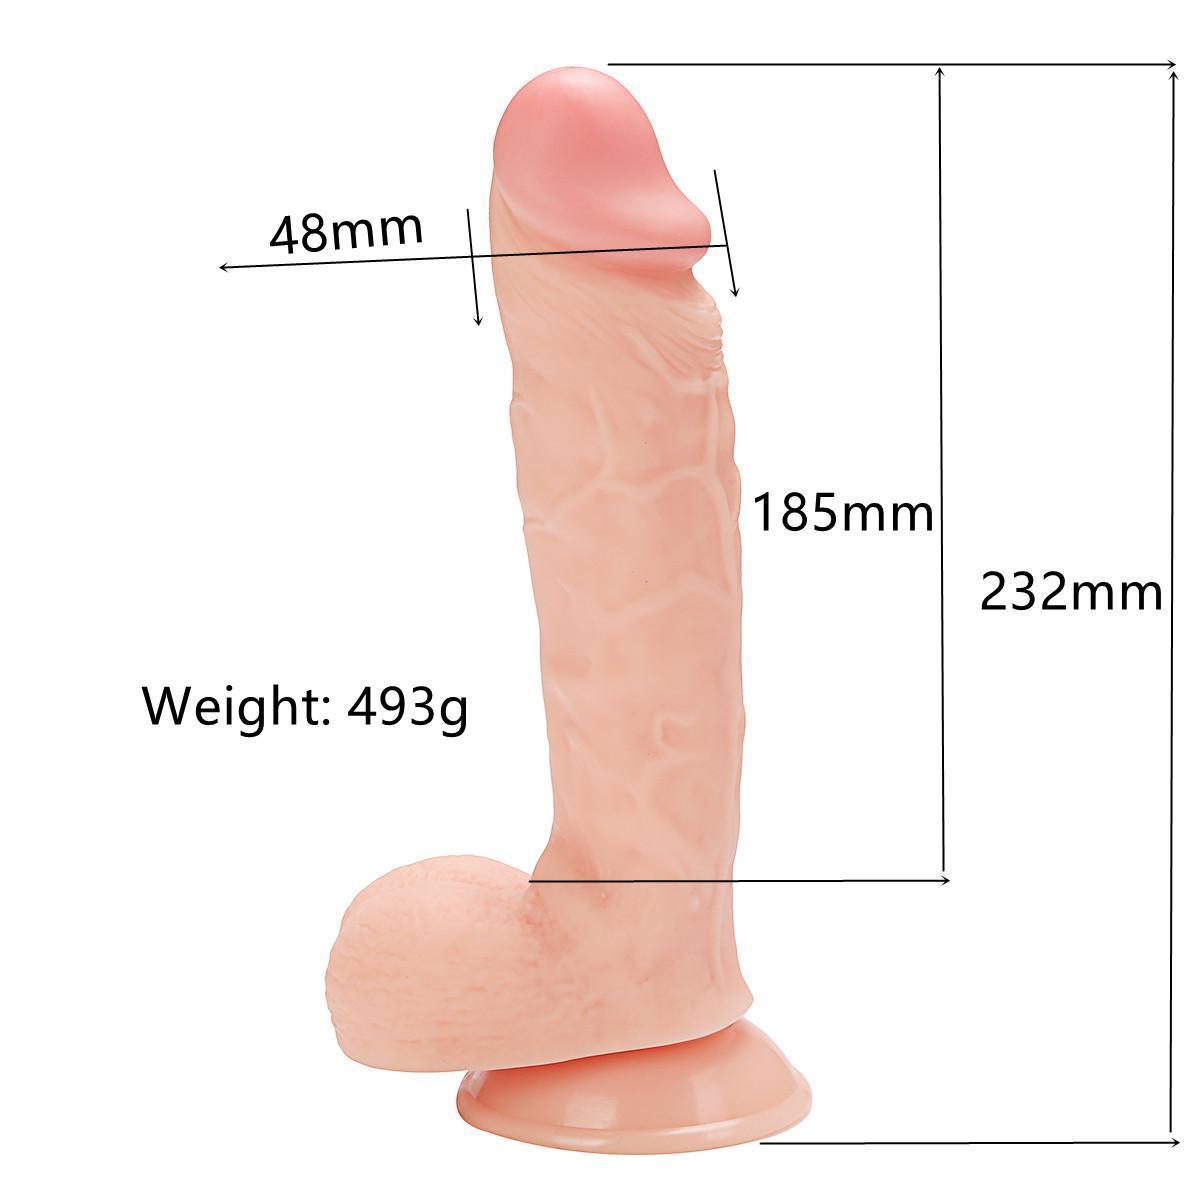 Simulated large penis, 9-inch thick suction cup, female masturbation wl270